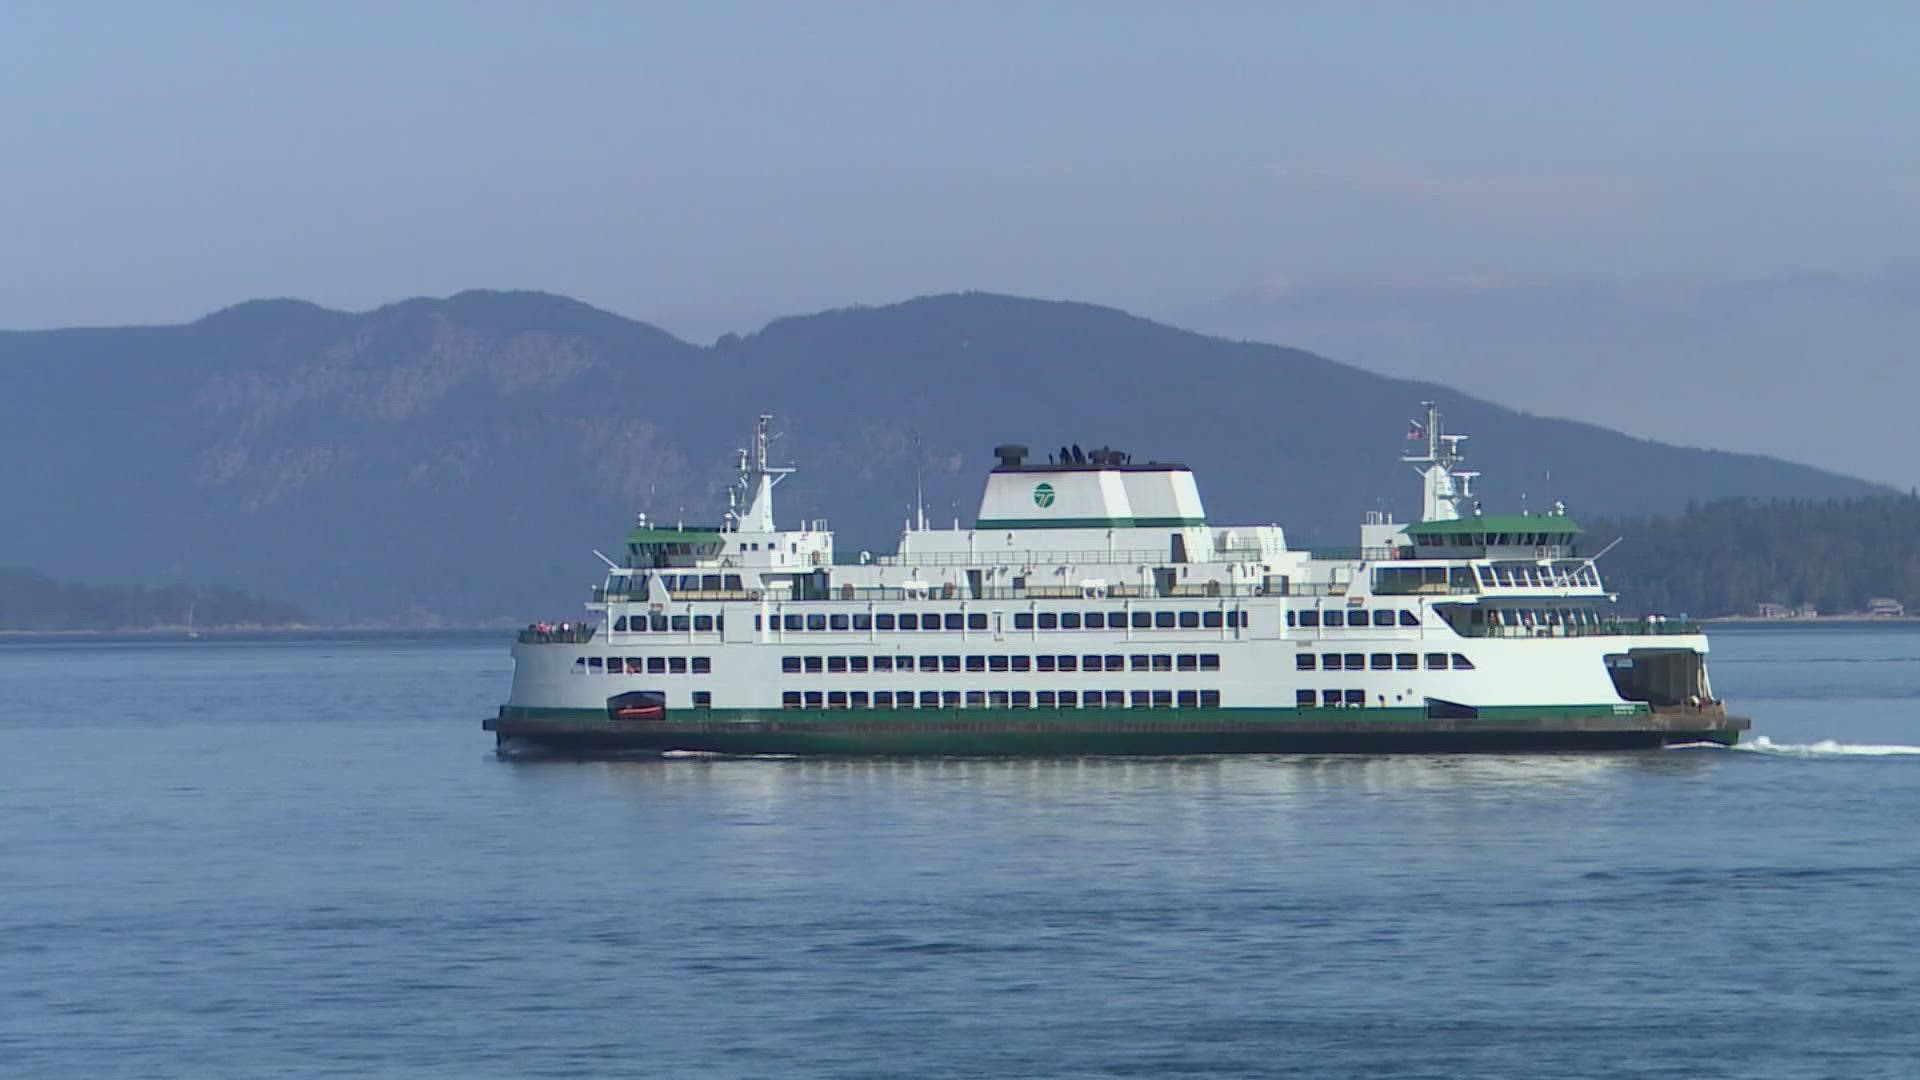 While it was smooth sailing Monday morning at the Edmonds ferry terminal, officials warned of possible delays throughout the day and even into next weekend.